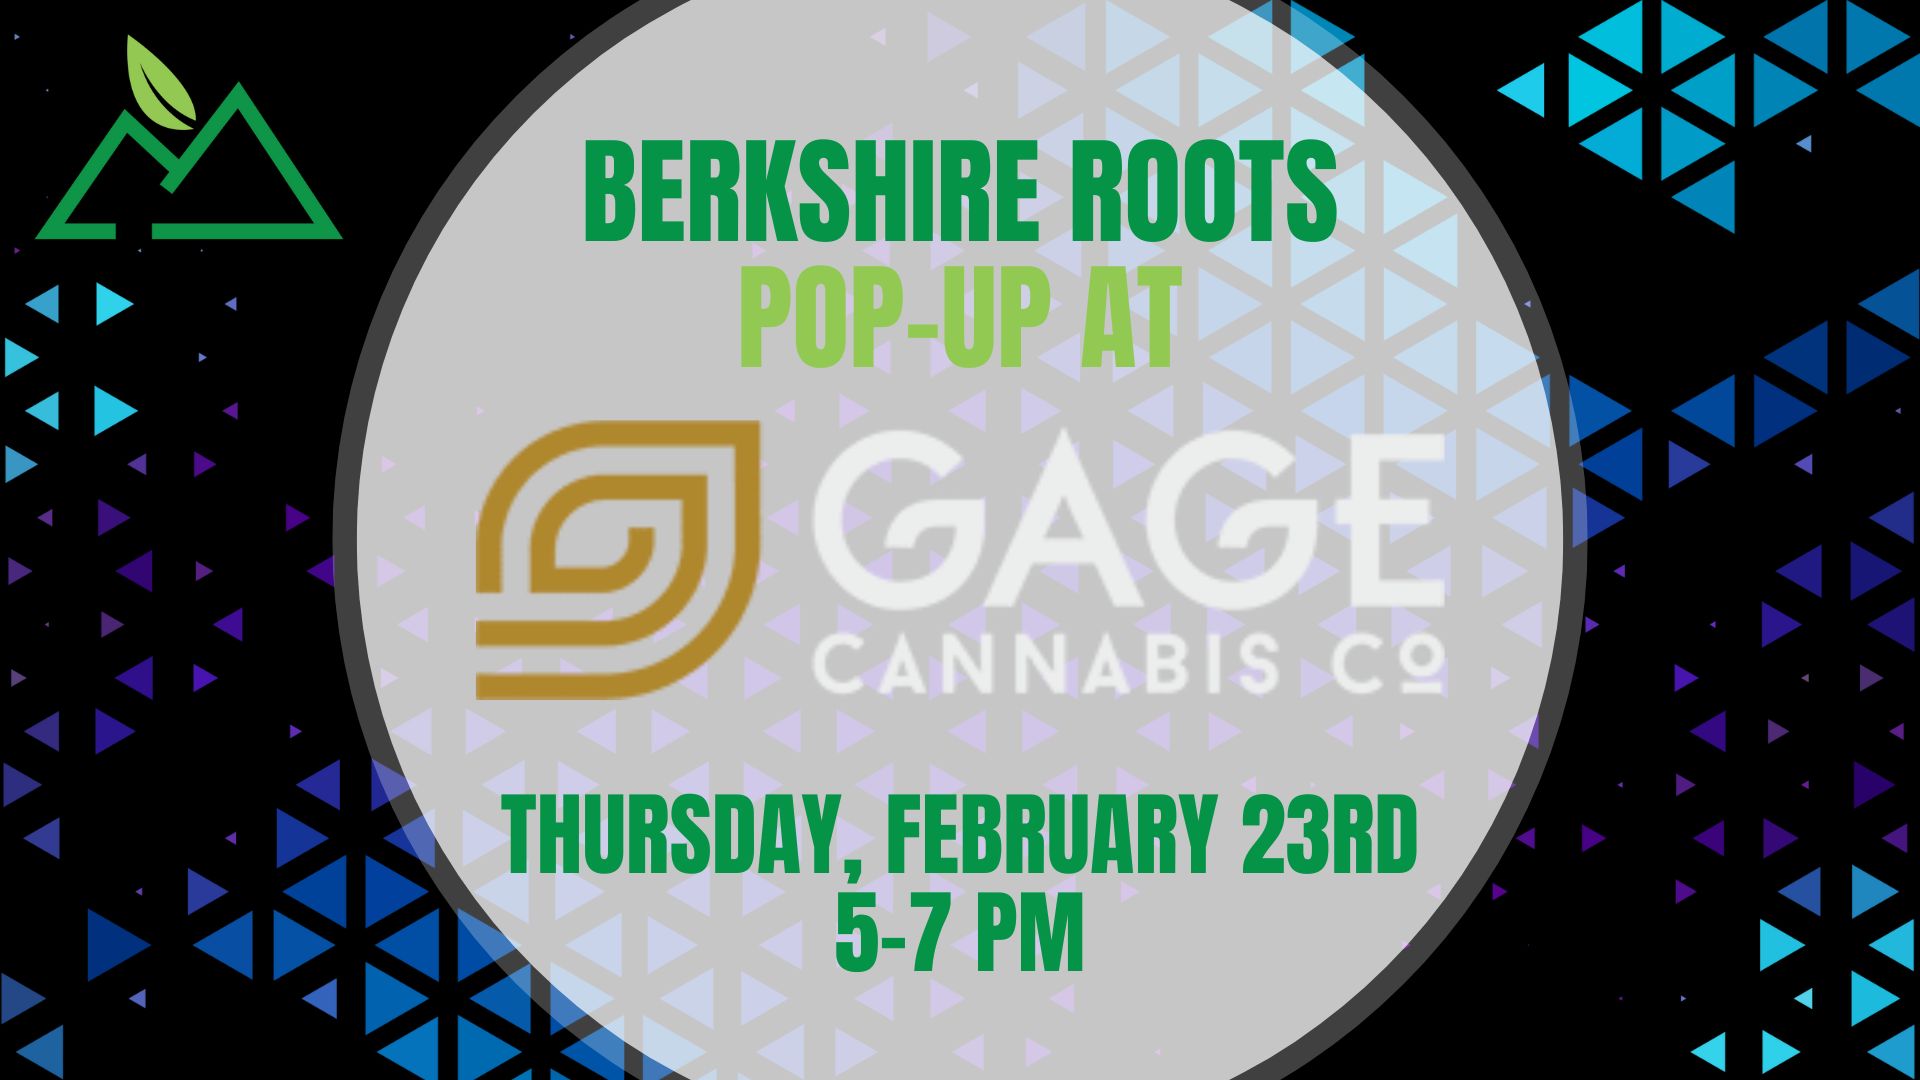 Berkshire Roots popup at Gage